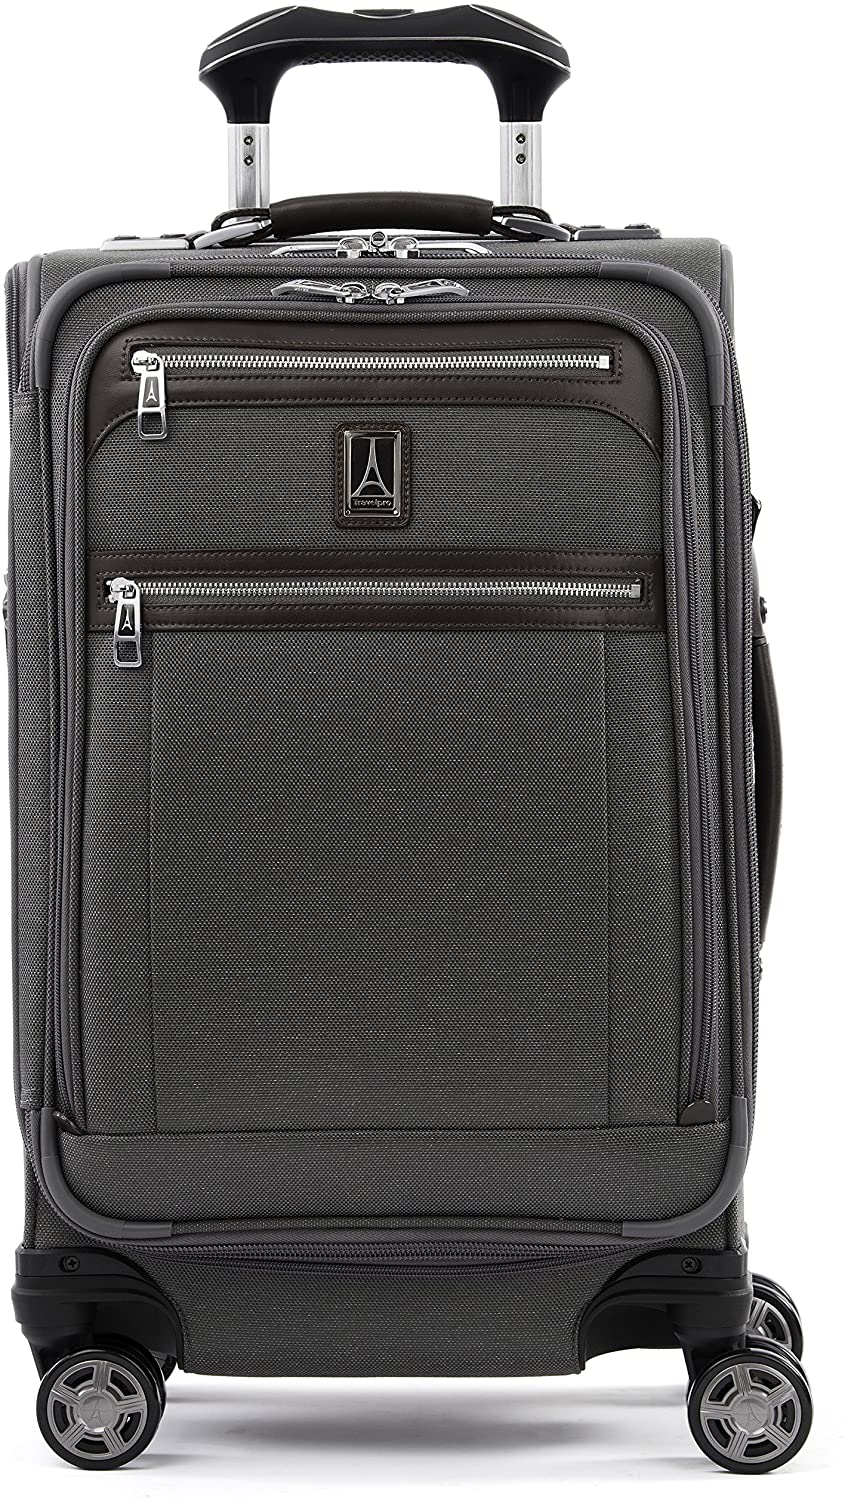 TravelPro Platinum Elite 21-inch Expandable Carry-on Spinner